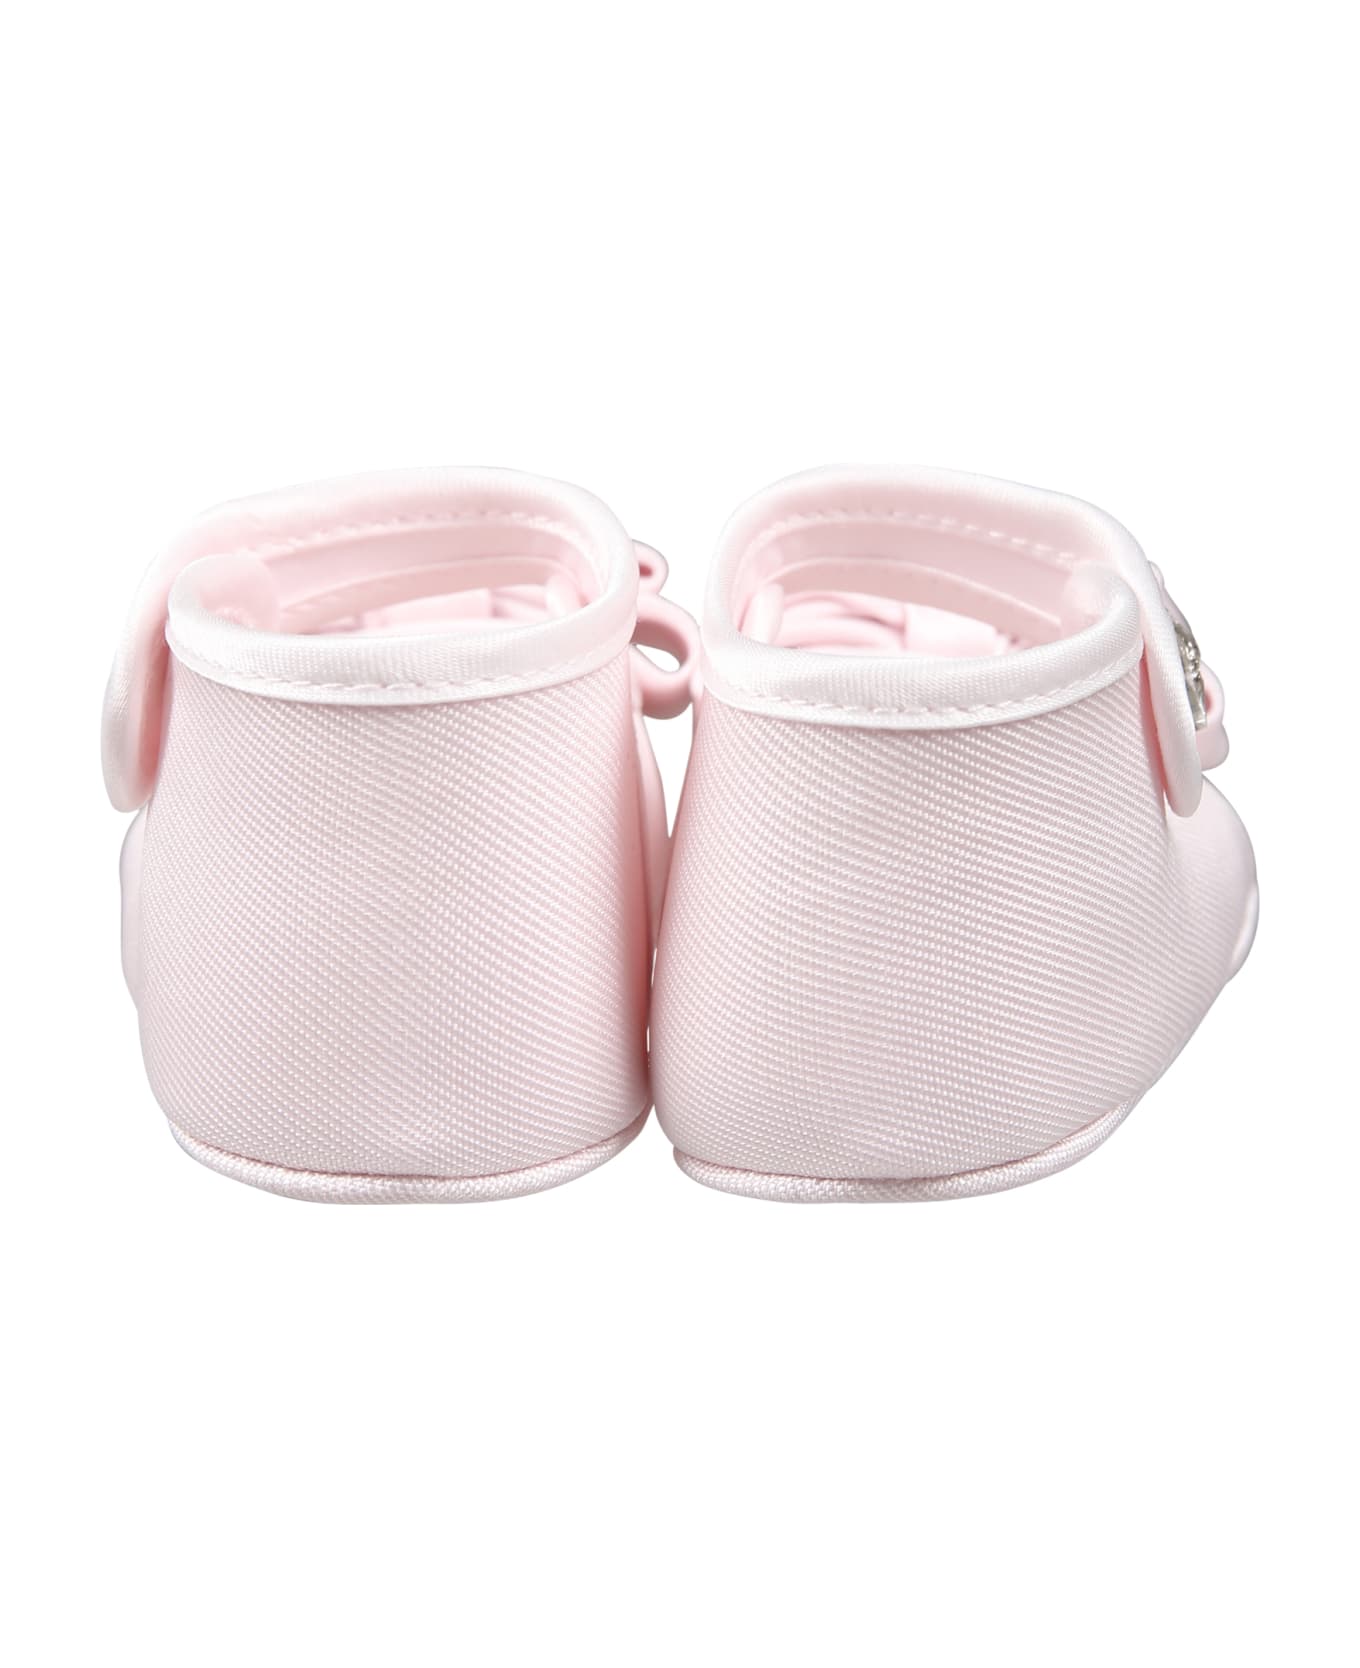 Monnalisa Pink Flat Shoes For Baby Girl With Bow - Pink シューズ